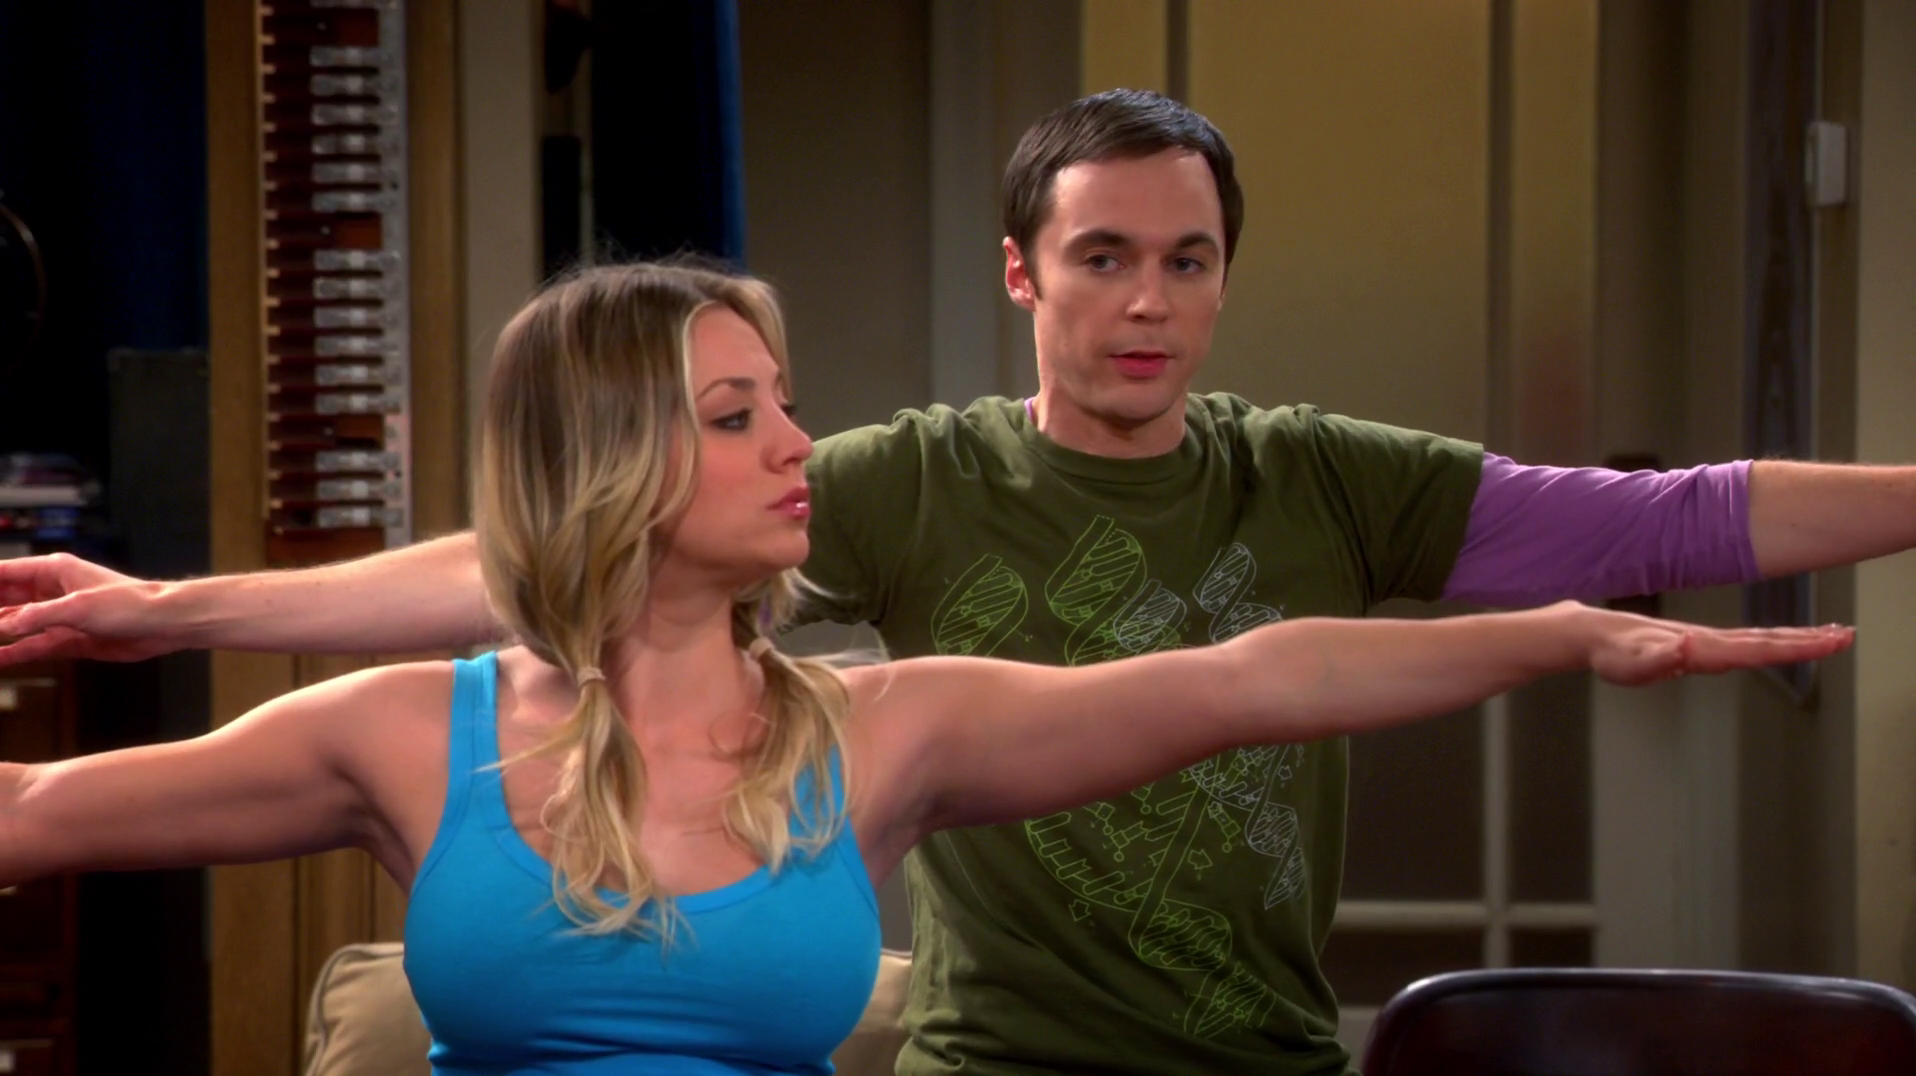 Image Penny And Sheldon Doing Warrior 2 The Big Bang Theory Wiki Fandom Powered By Wikia